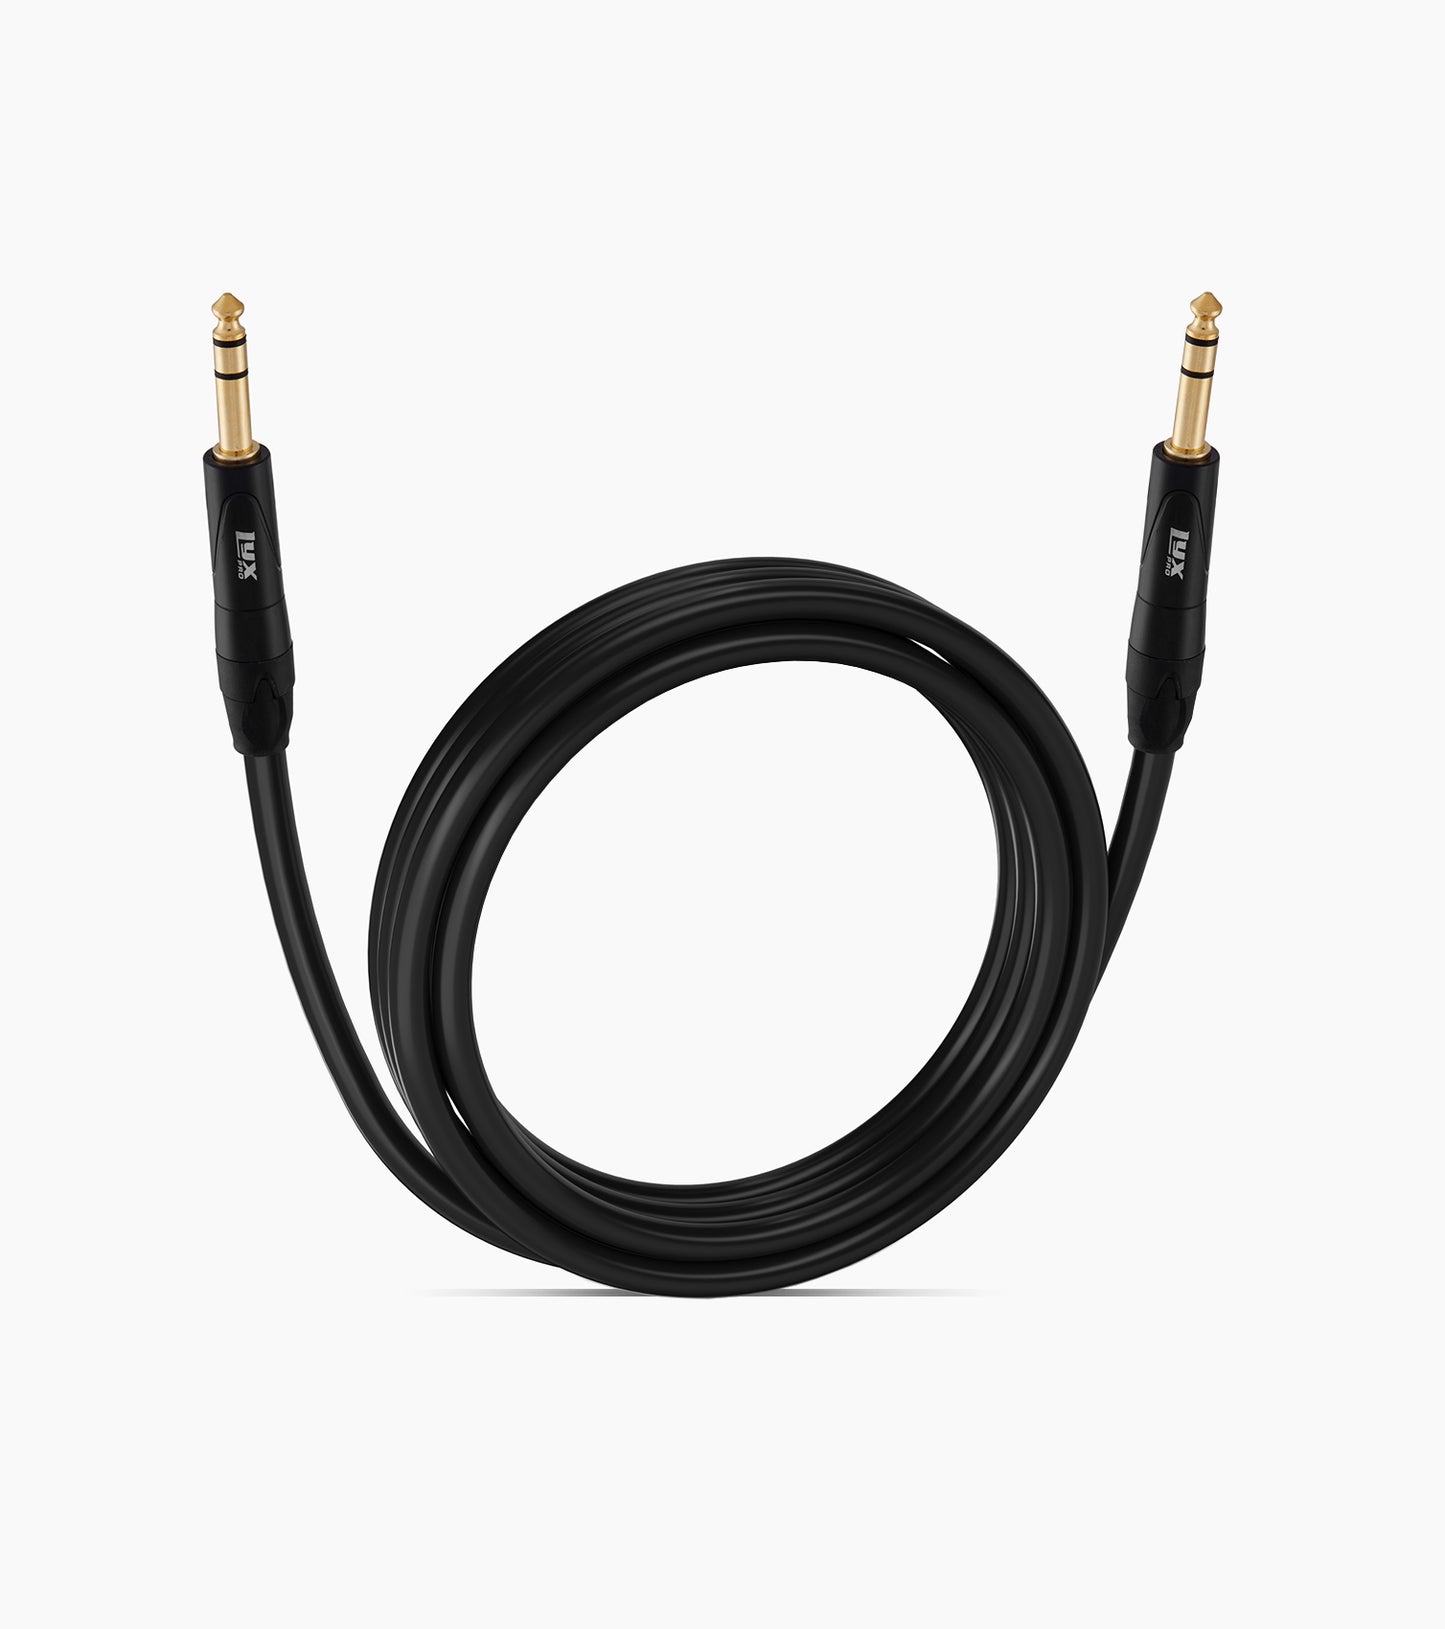 10 ft TRS audio cable